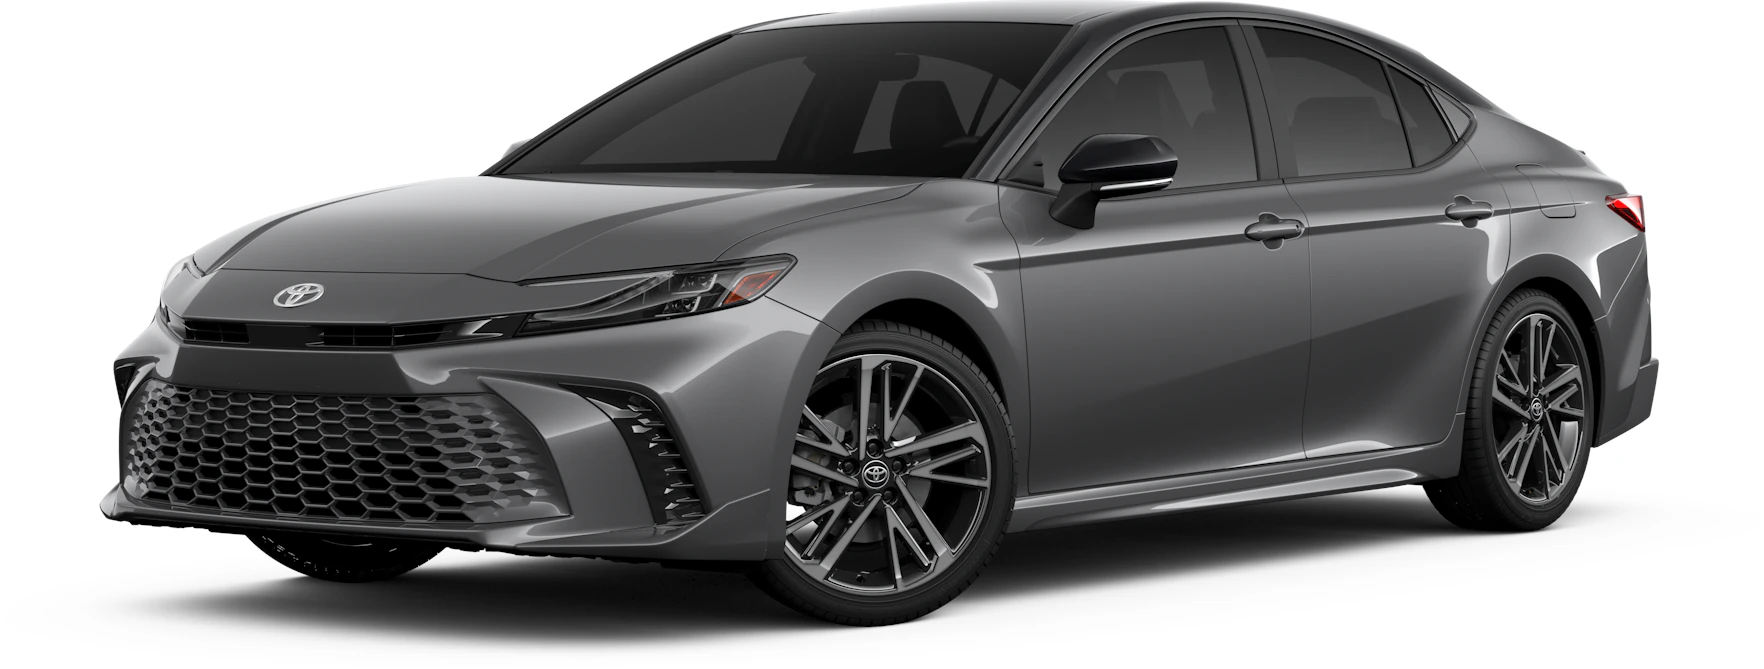 What Is the Top Trim of the 2025 Camry?